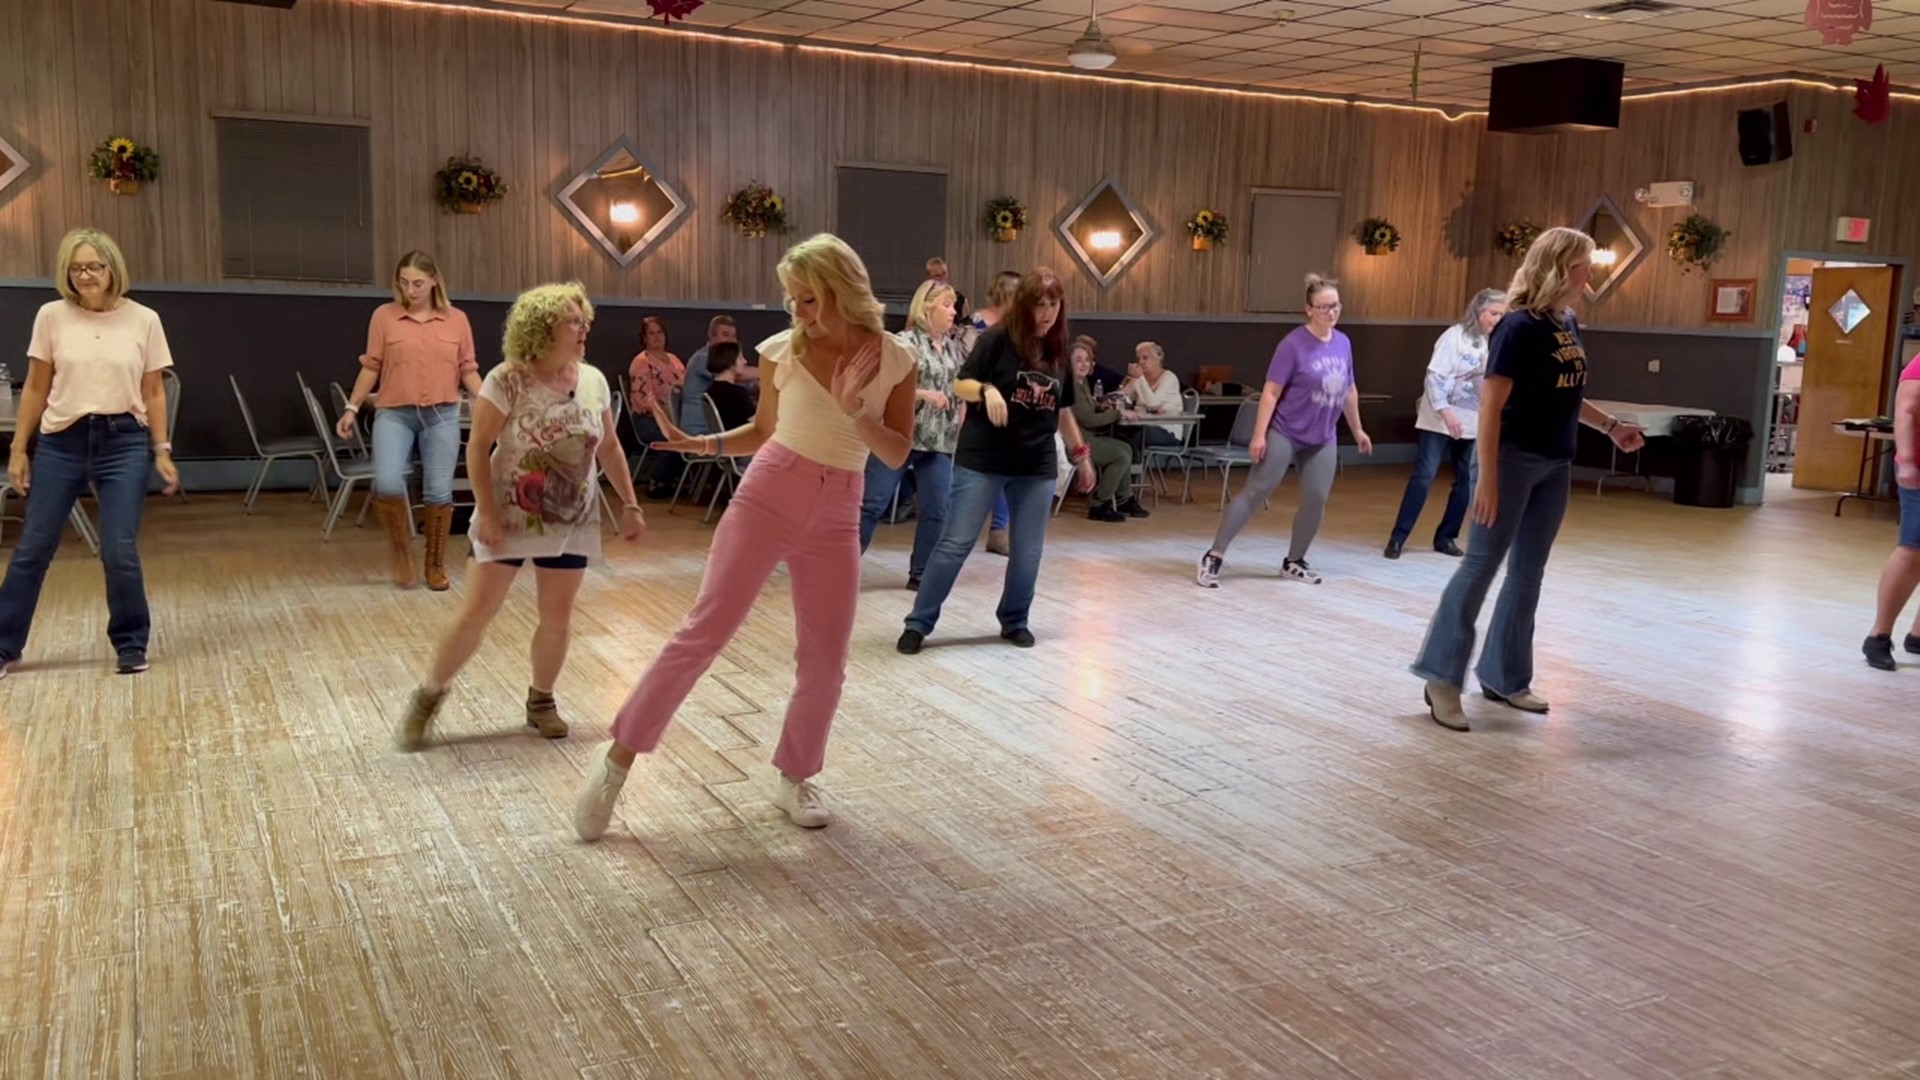 There's a place in Luzerne County where you can learn to line dance twice a month, and Newswatch 16's Chelsea Strub checked it out!